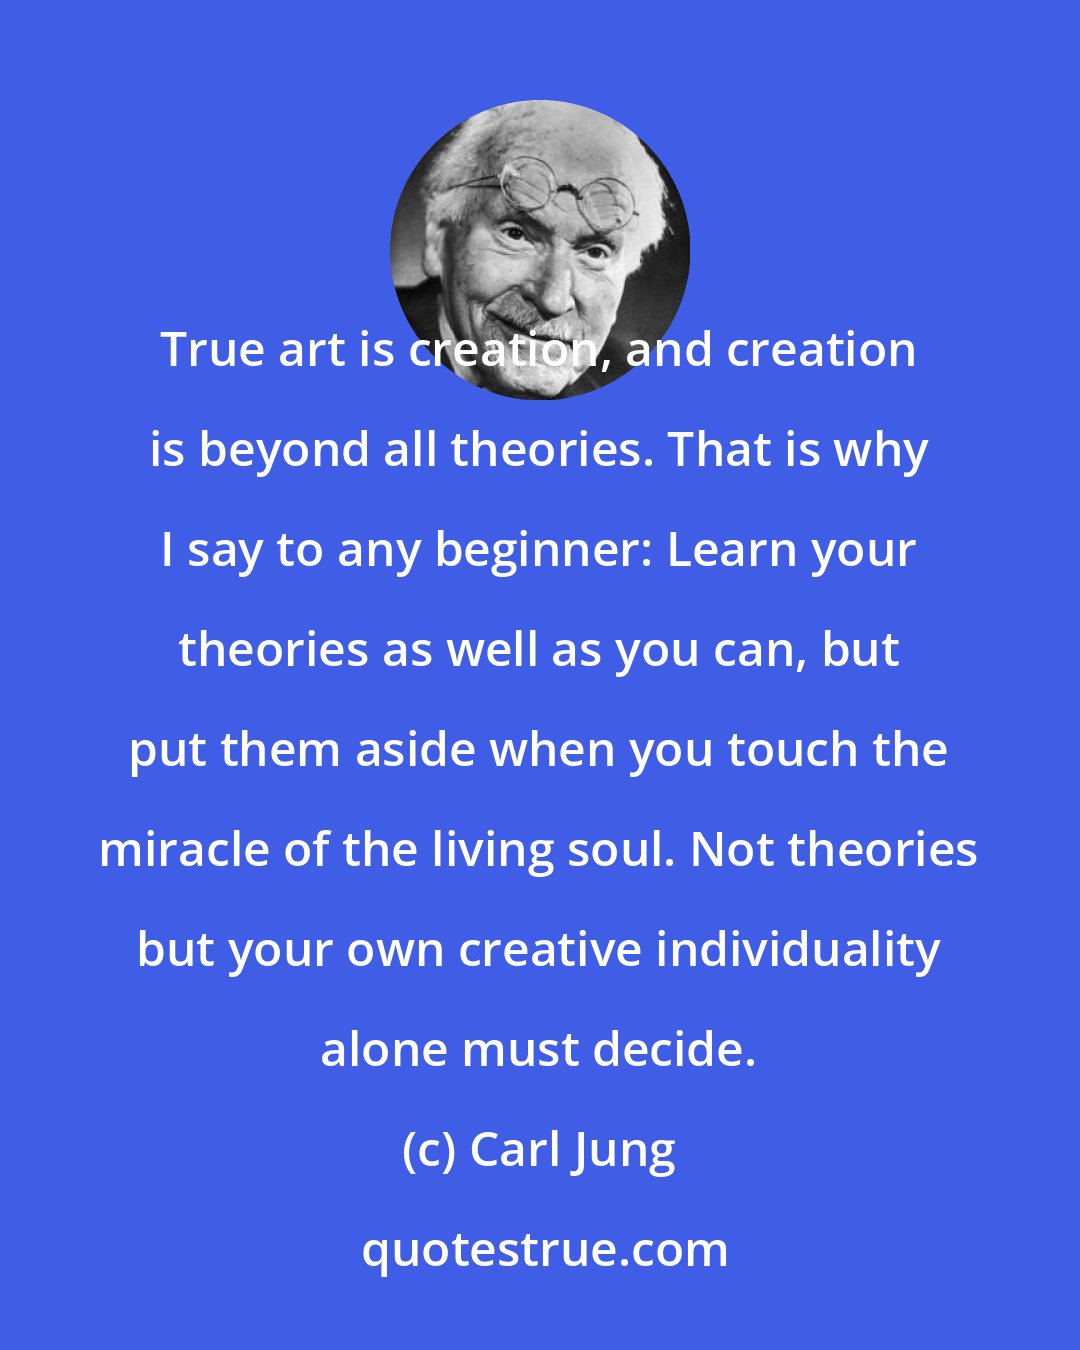 Carl Jung: True art is creation, and creation is beyond all theories. That is why I say to any beginner: Learn your theories as well as you can, but put them aside when you touch the miracle of the living soul. Not theories but your own creative individuality alone must decide.